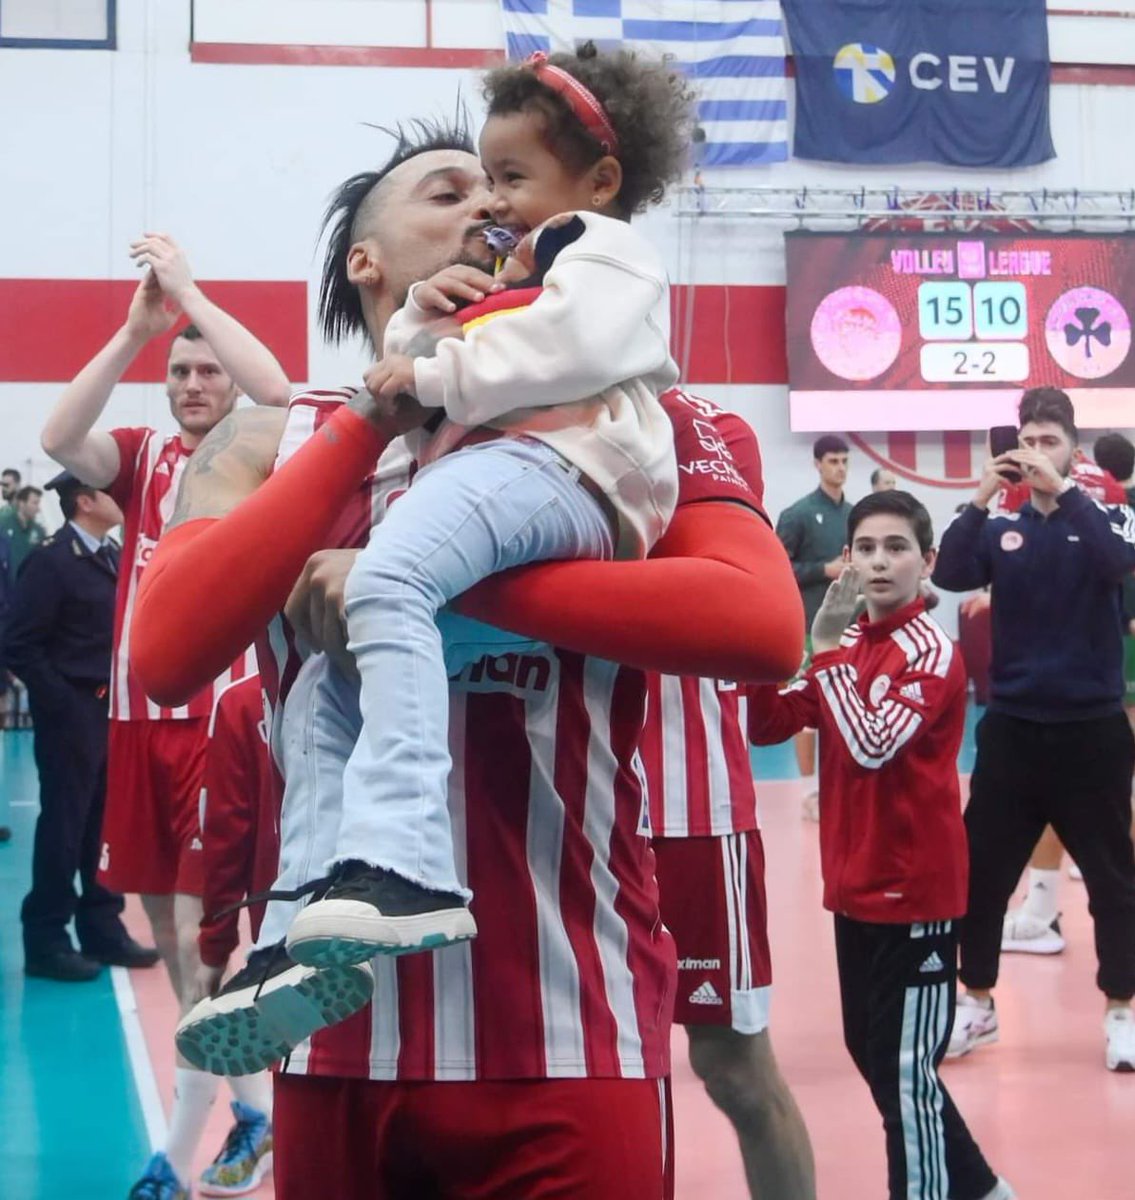 Another Great Derby Win in front of our Great Fans 
Thank y’all for the support and never give up 
Always BELIEVE , BELIEVE AND BELIEVE 
We are olympiacos 🔴⚪️🦁🚀#osfp #Olympiacos #OlympiacosSFP   #Volleyleague #SalvadorsGang #ΣαλβαδόρΙντάλγκο #SHO23 #StrongerTogether #pallavolo